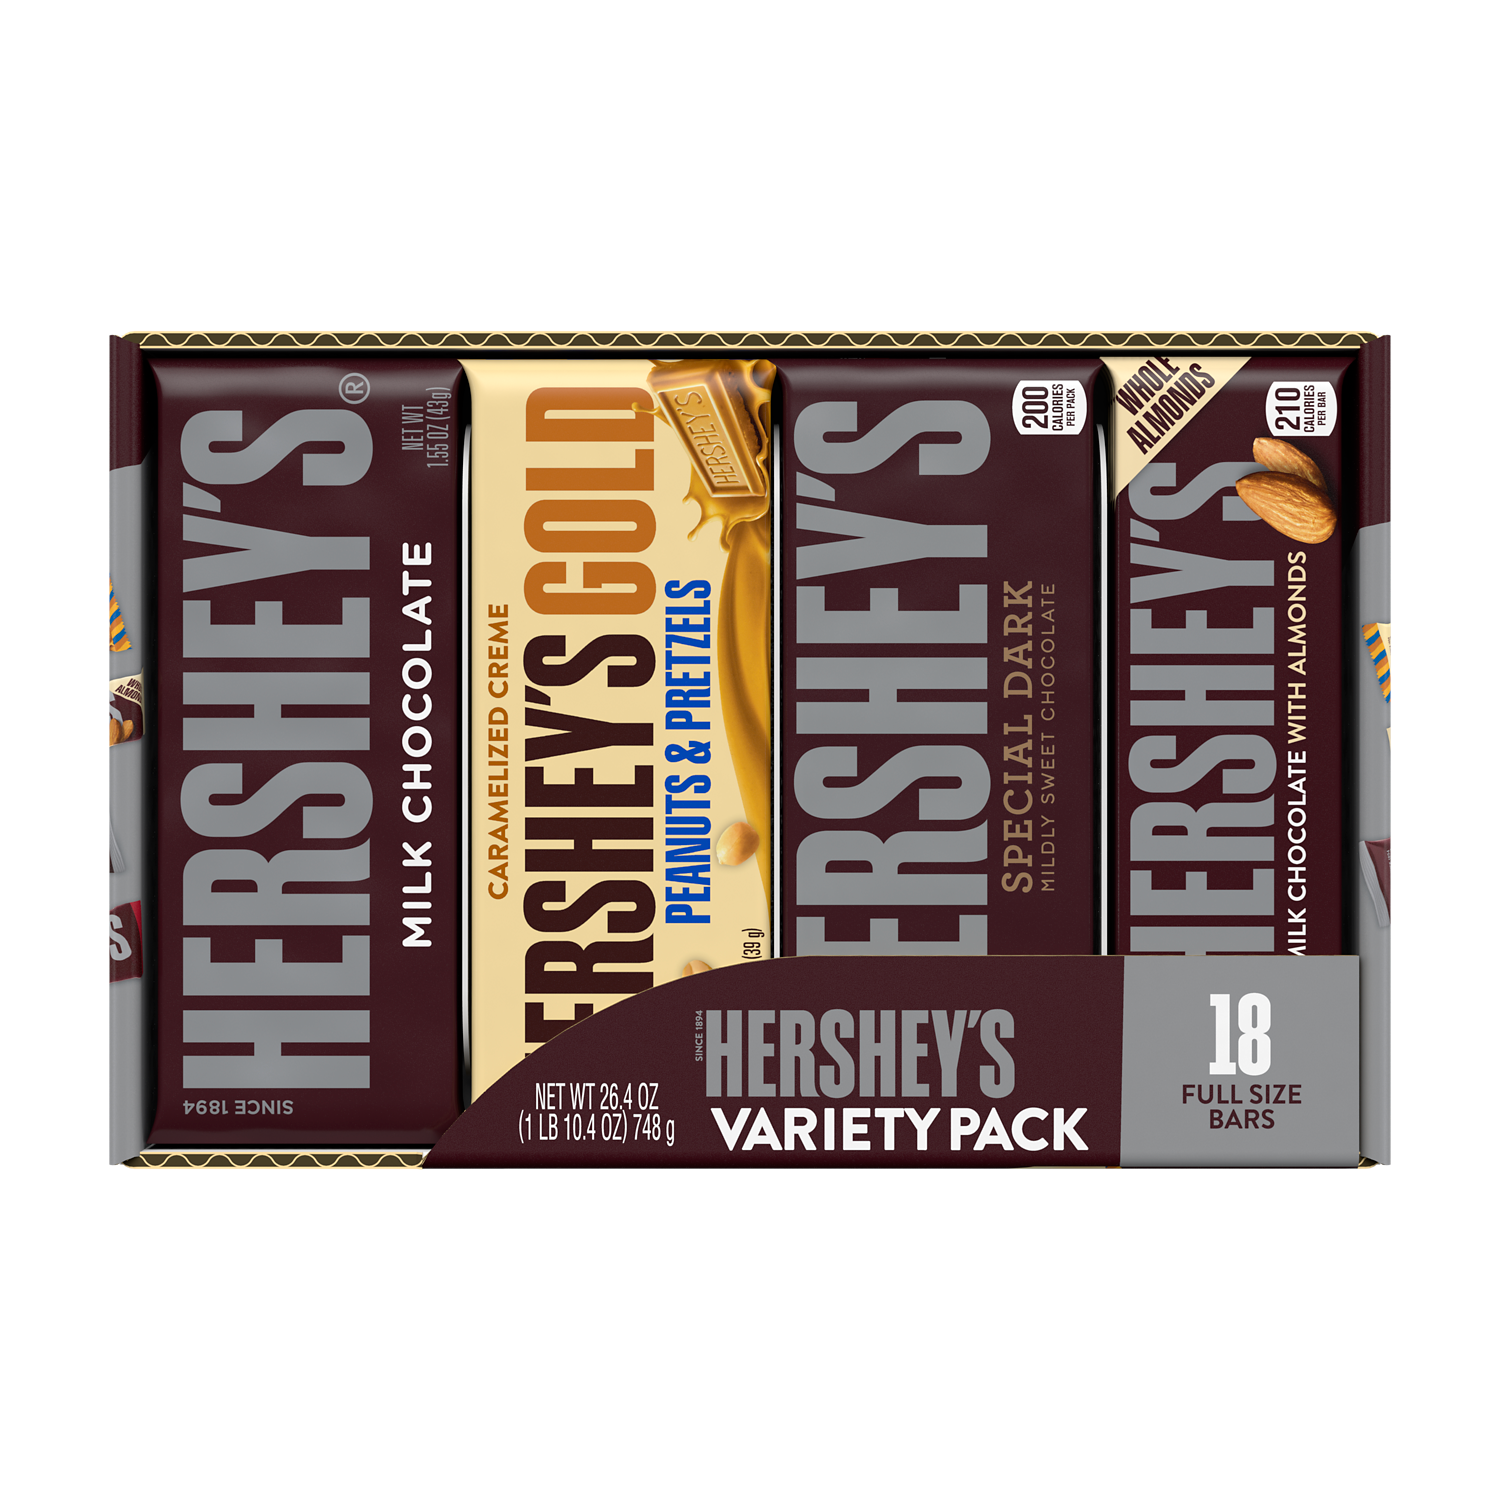 HERSHEY'S Variety Pack Candy Bars, 26.4 oz box, 18 count - Front of Package